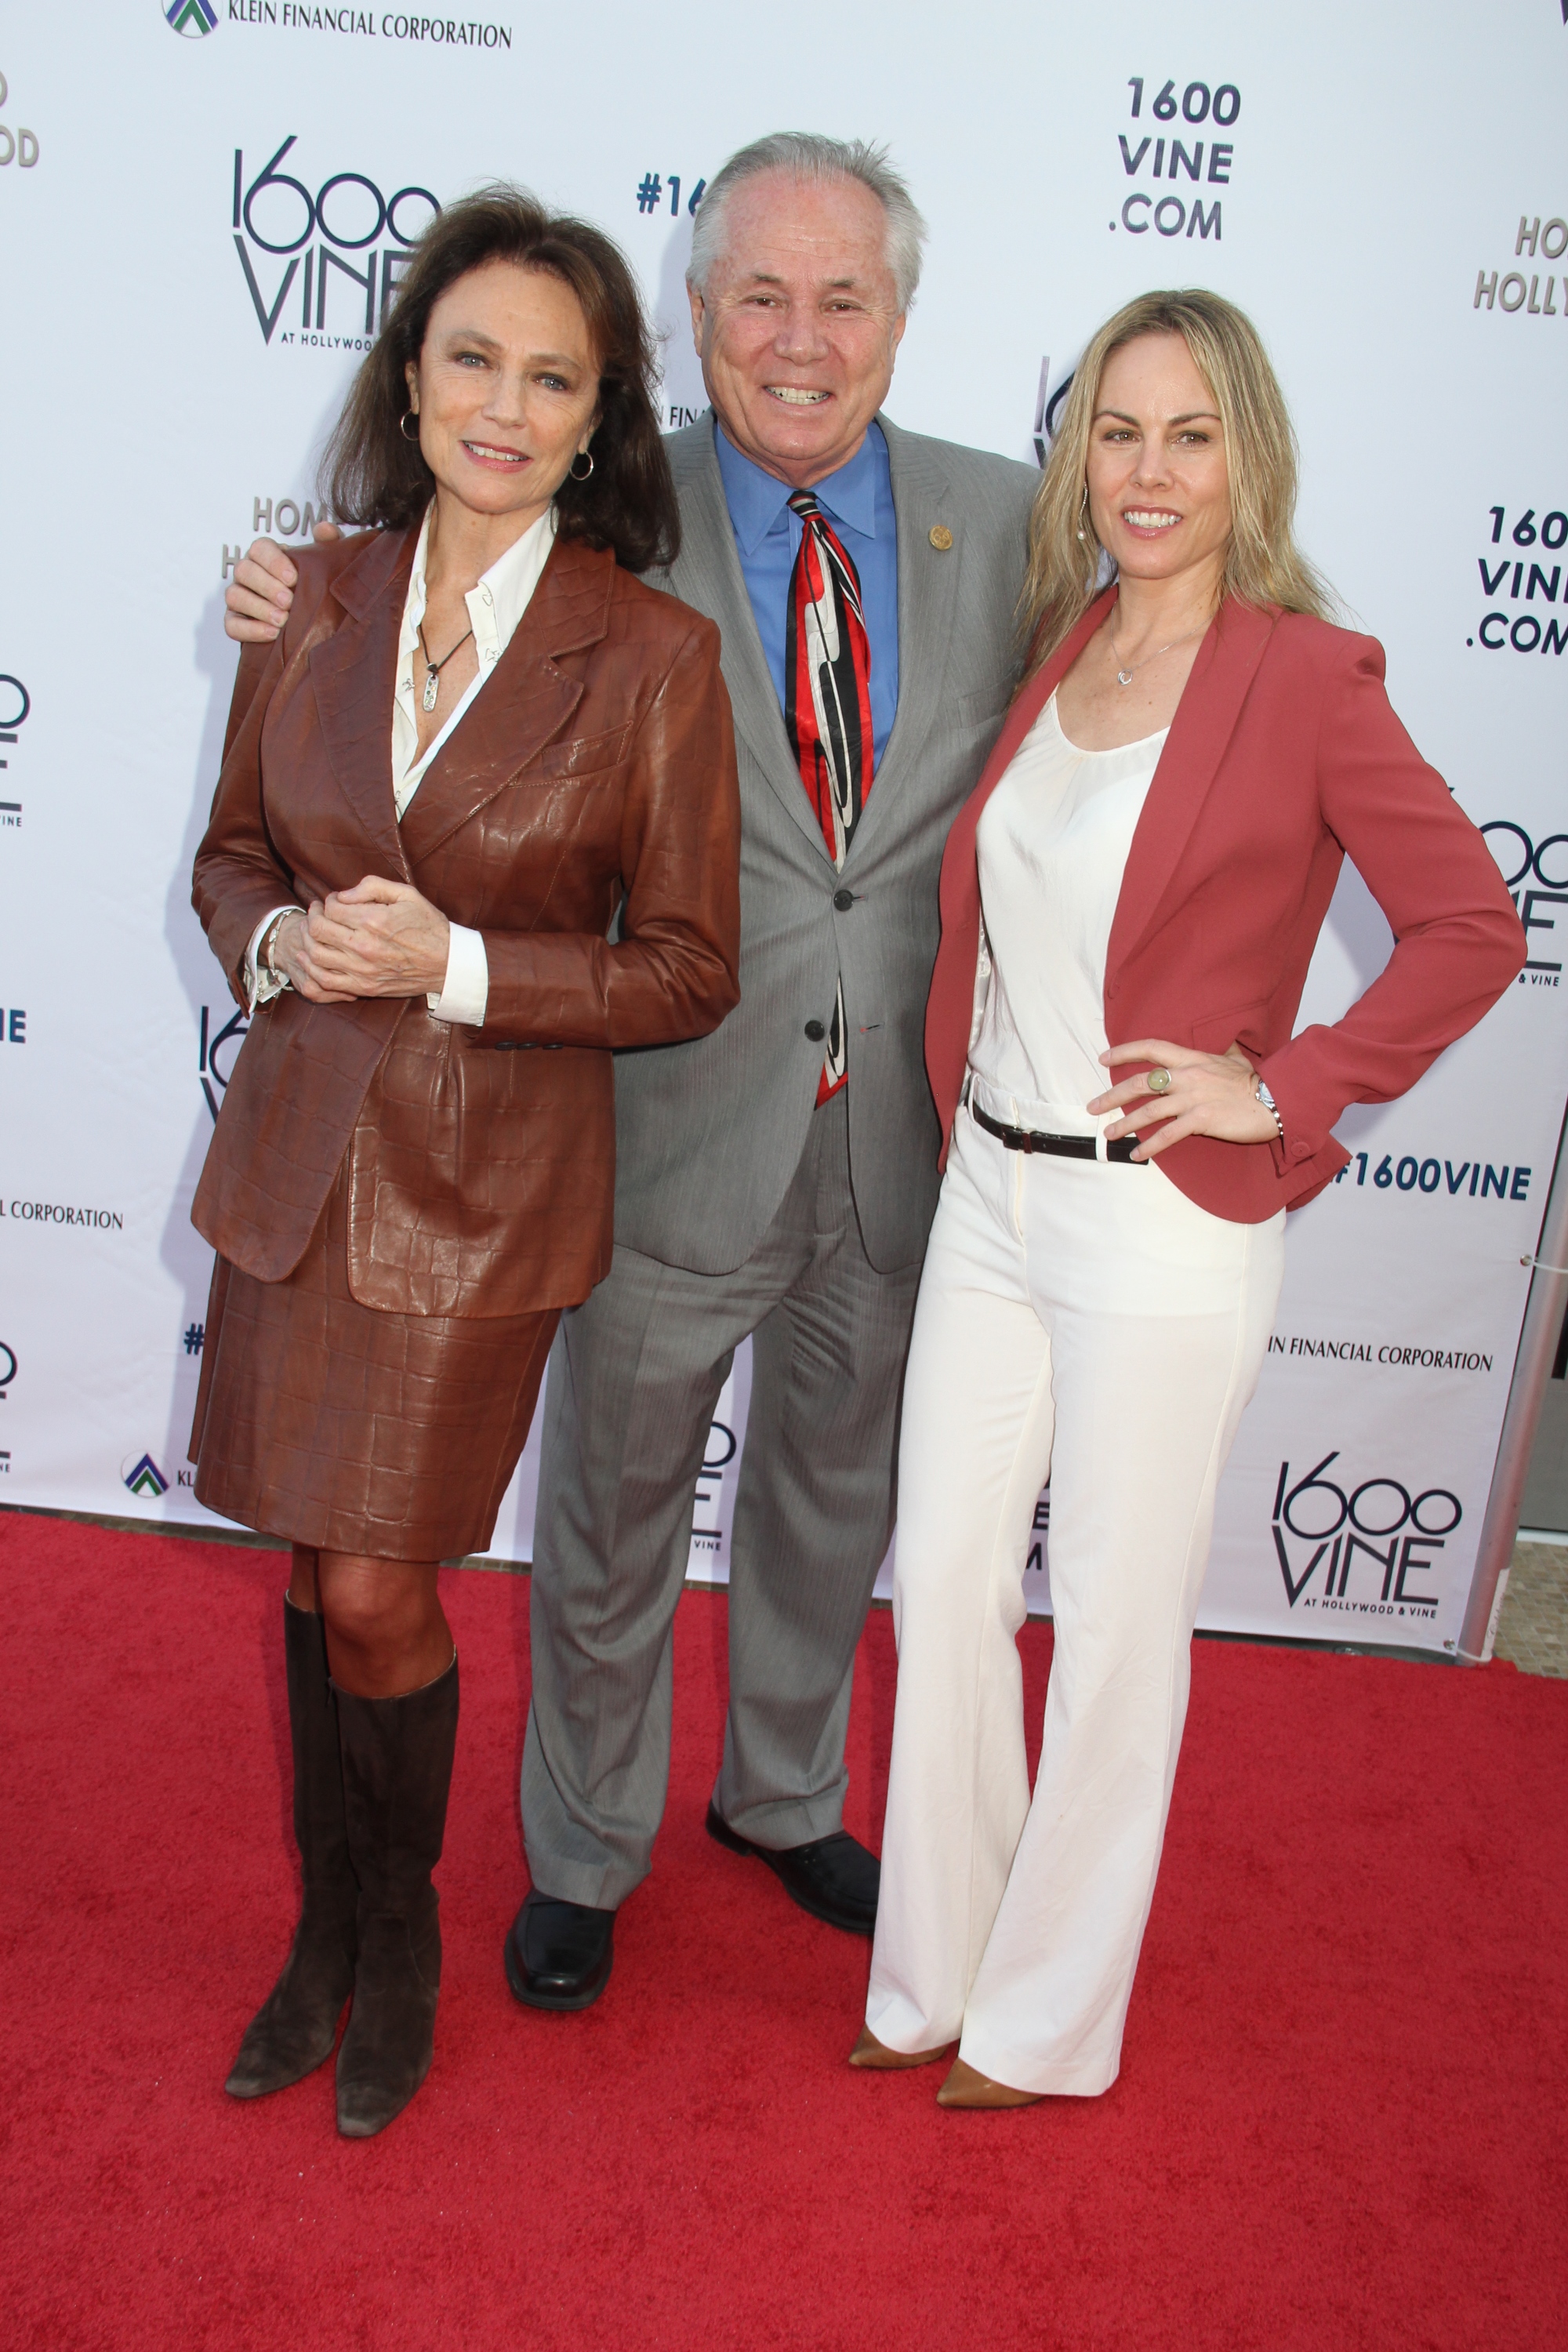 Christy Oldham, Jacqueline Bisset and Los Angeles City Councilman Tom LaBonge attend the Made in Hollywood Awards.